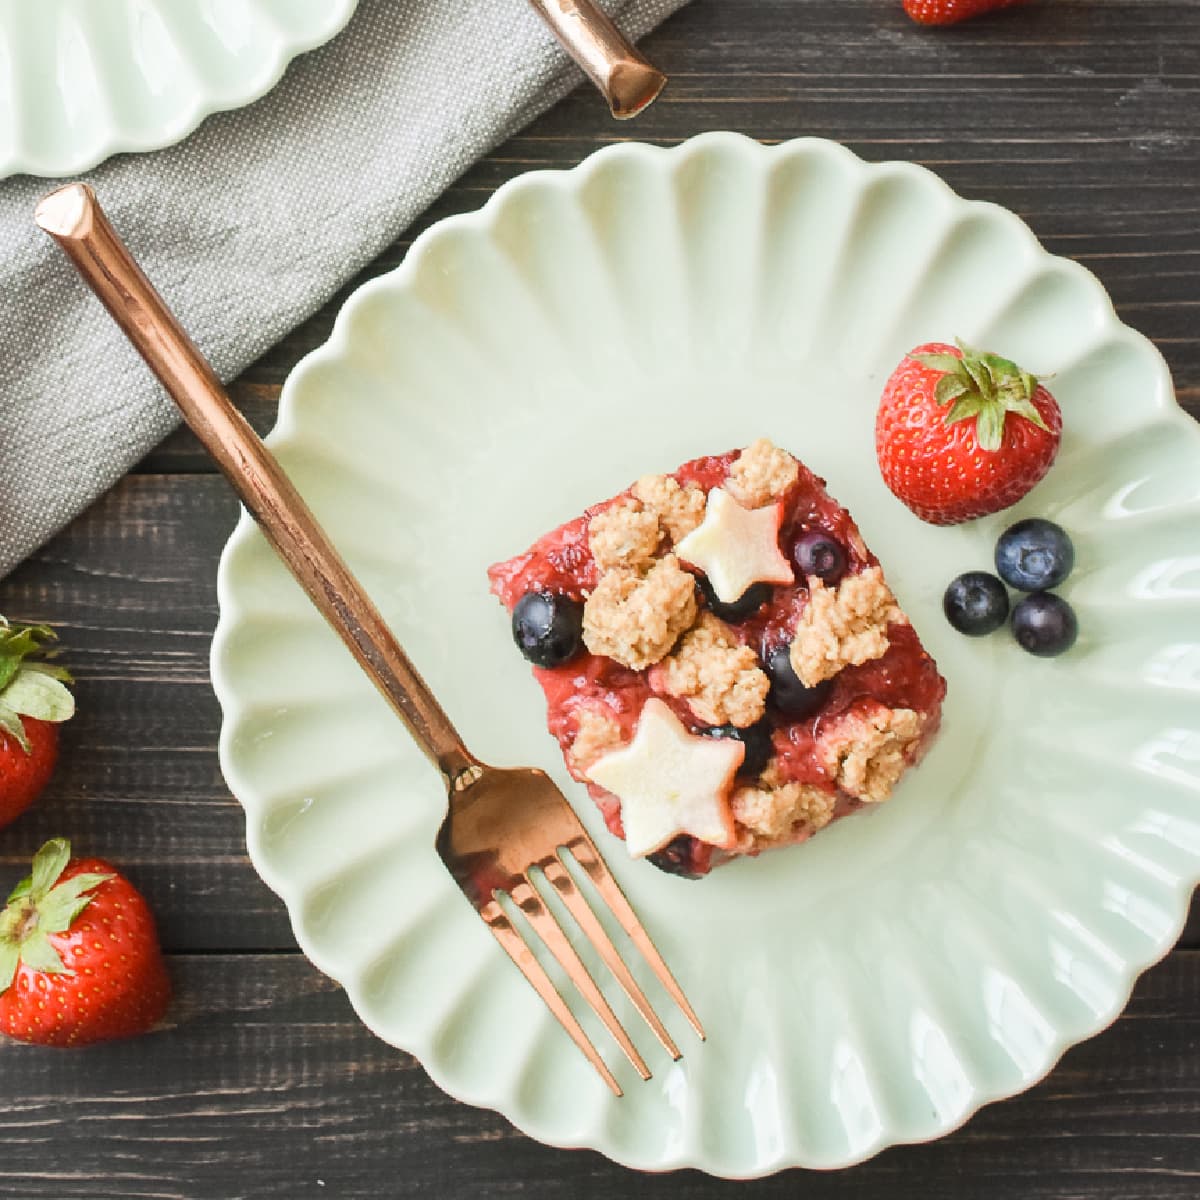 These Red, White and Blue Berry Crumb Bars are a fun, fruity and festive treat the whole family will love! They're also 21 Day Fix and Weight Watchers friendly and can easily be made gluten-free! #21dayfix #mealprep #fourthofjuly #4thofjuly #redwhiteandblue #weightwatchers #ww #healthy #healthytreat #summer #summerfood #glutenfree #dessert #healthybreakfast #healthysnack